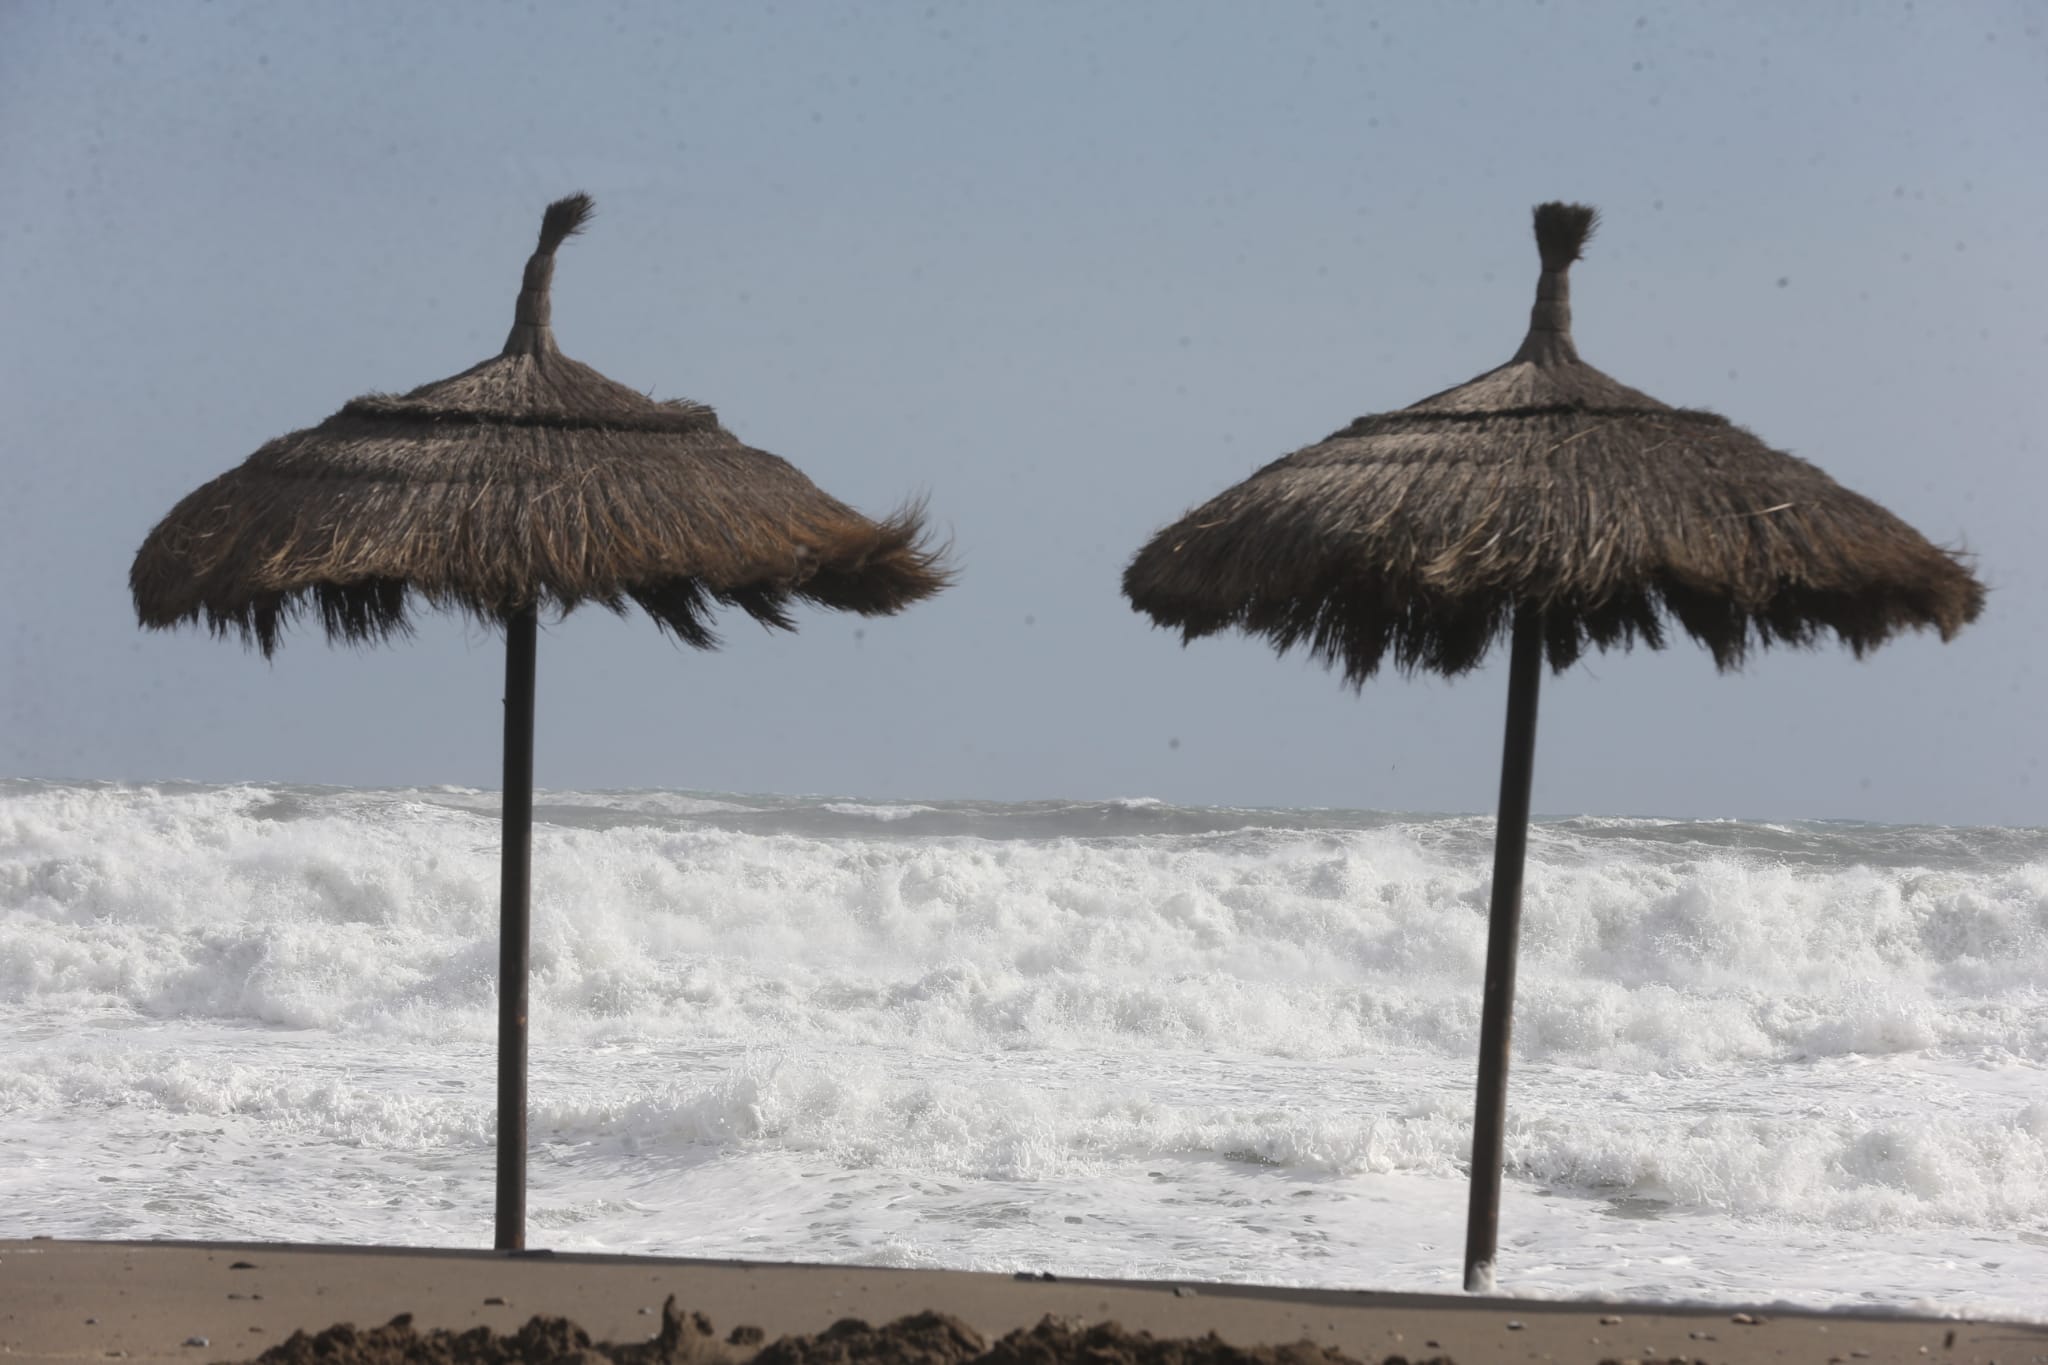 Two people were injured in Malaga province and a beach bar in Fuengirola was flattened. 